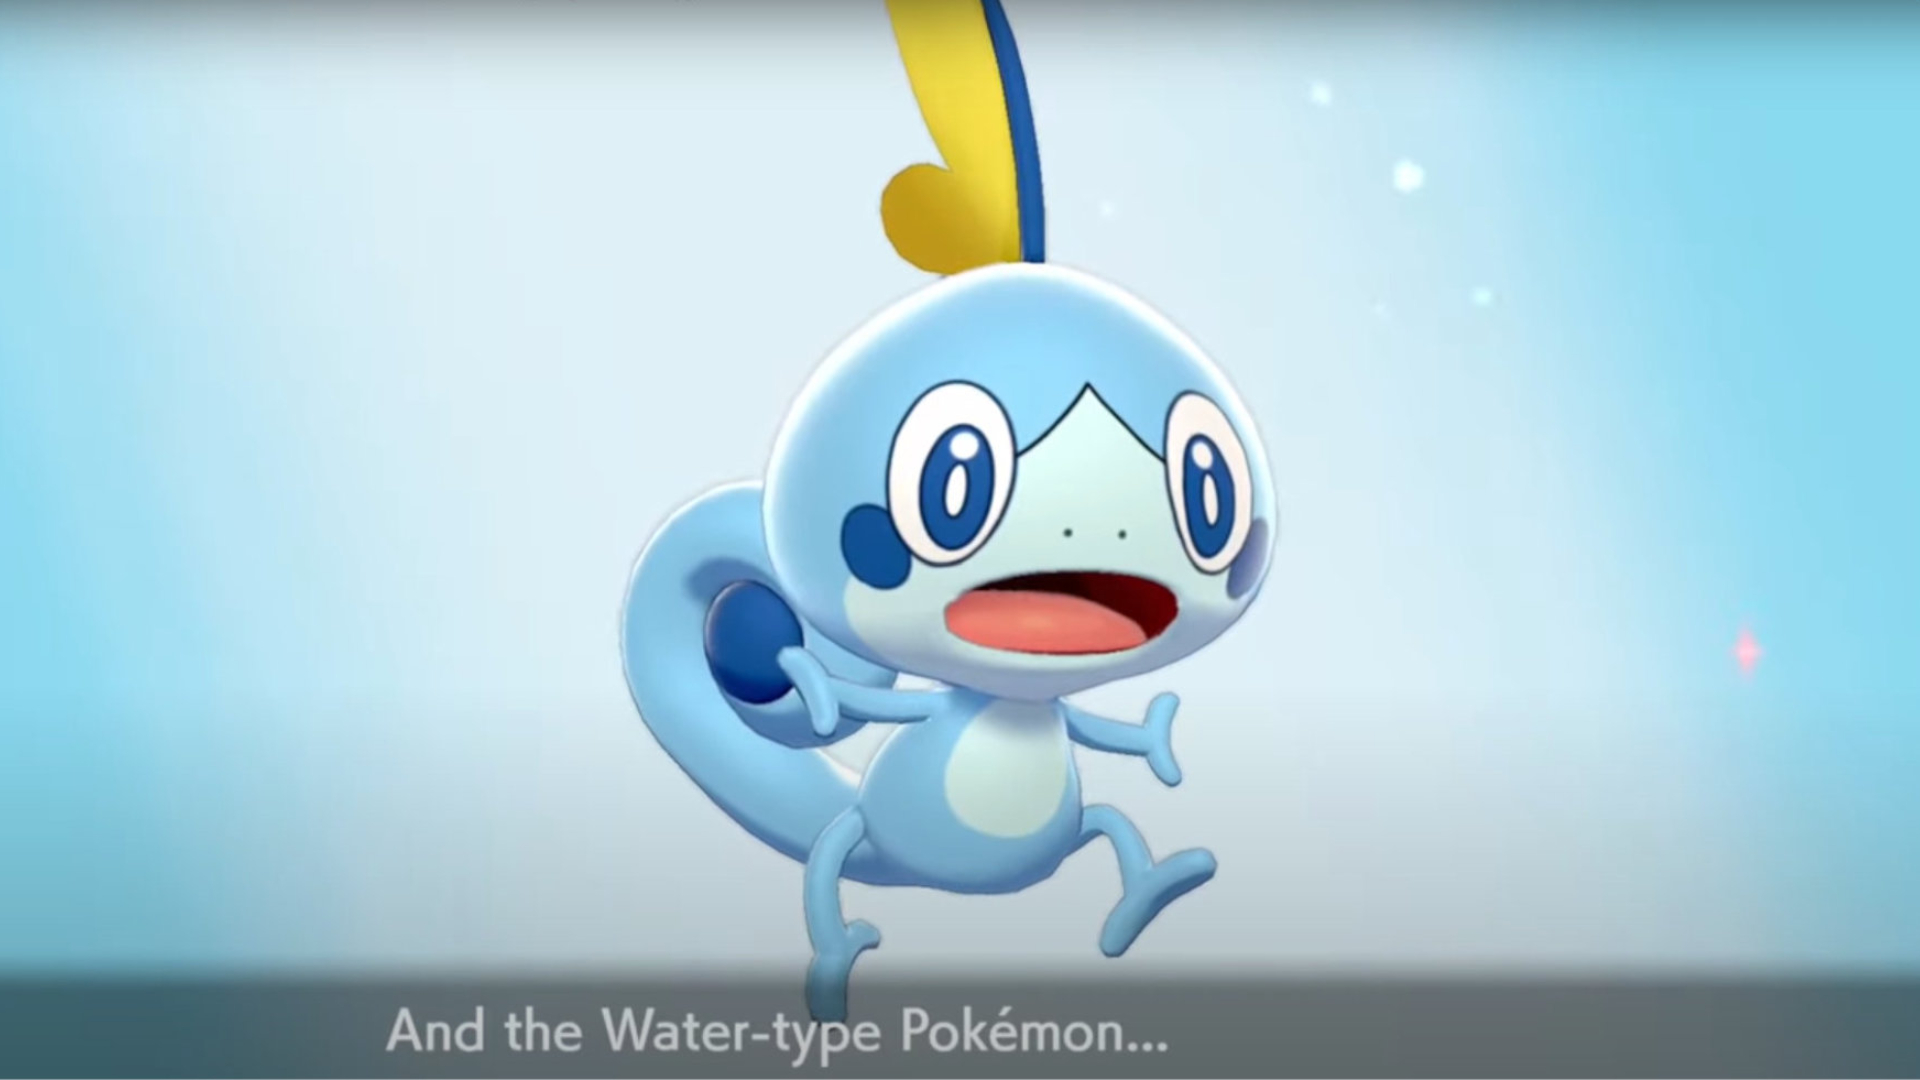 Pokémon Sword and Shield Sobble guide: Evolutions and best moves